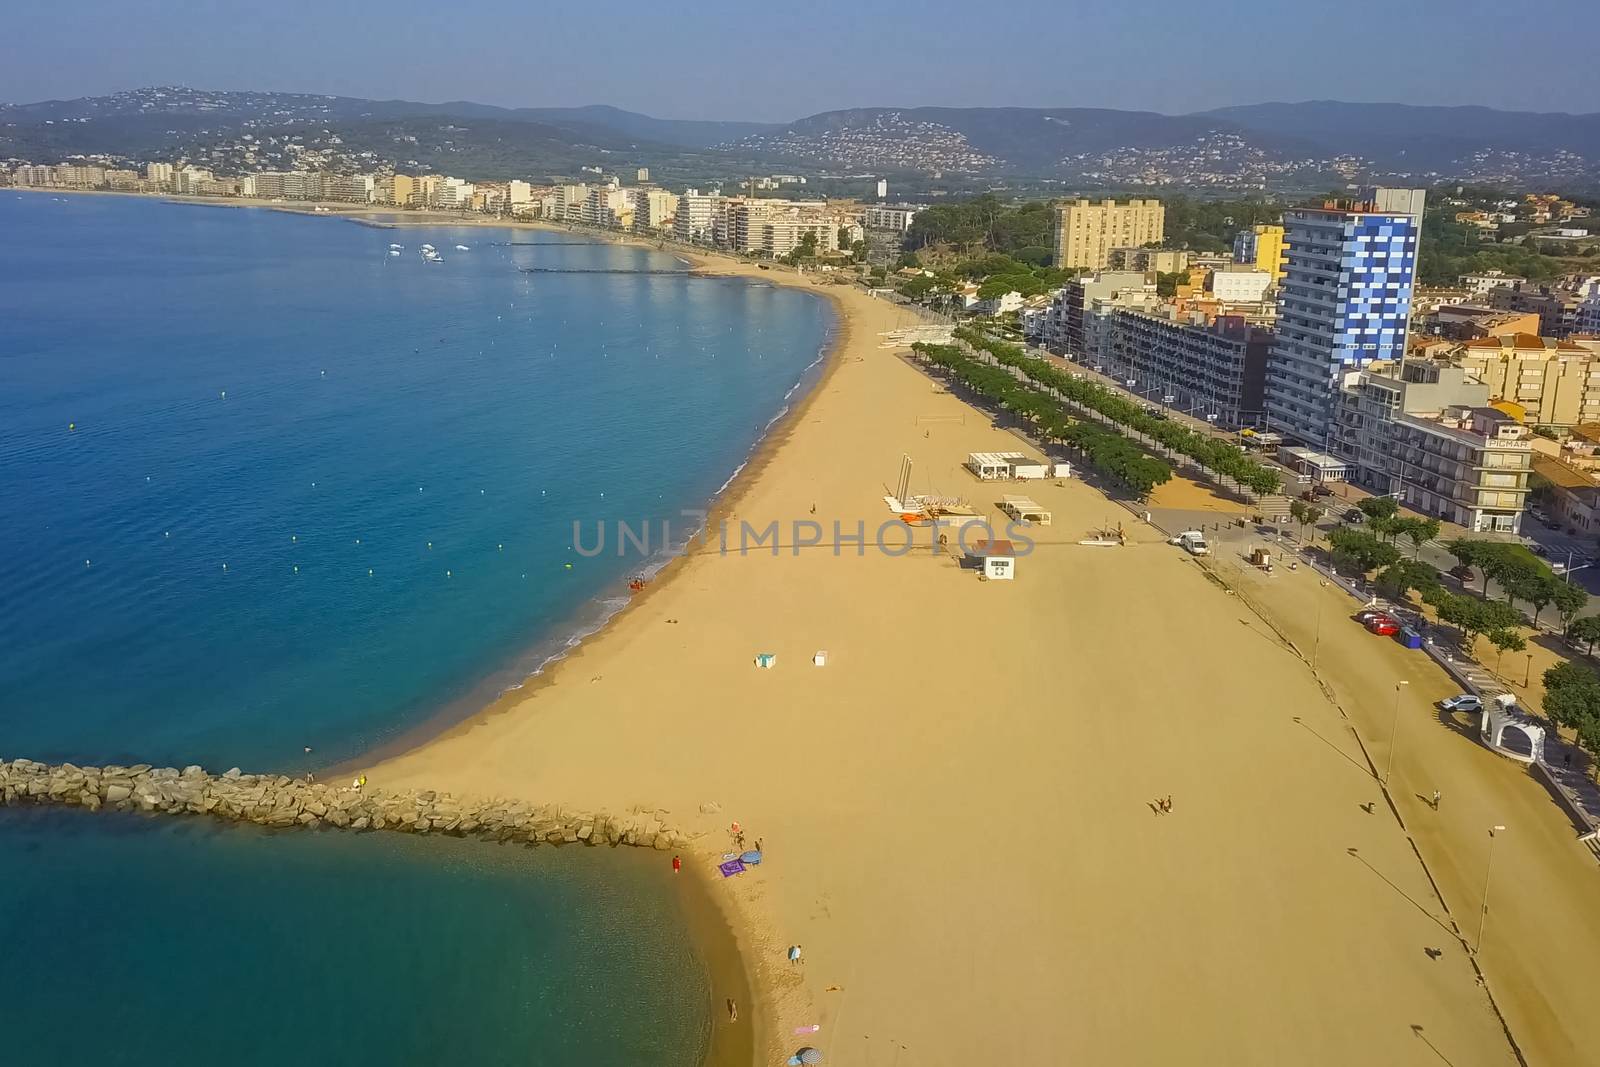 Mediterranean coast in Spain. Spain's courts by the sea. by DePo